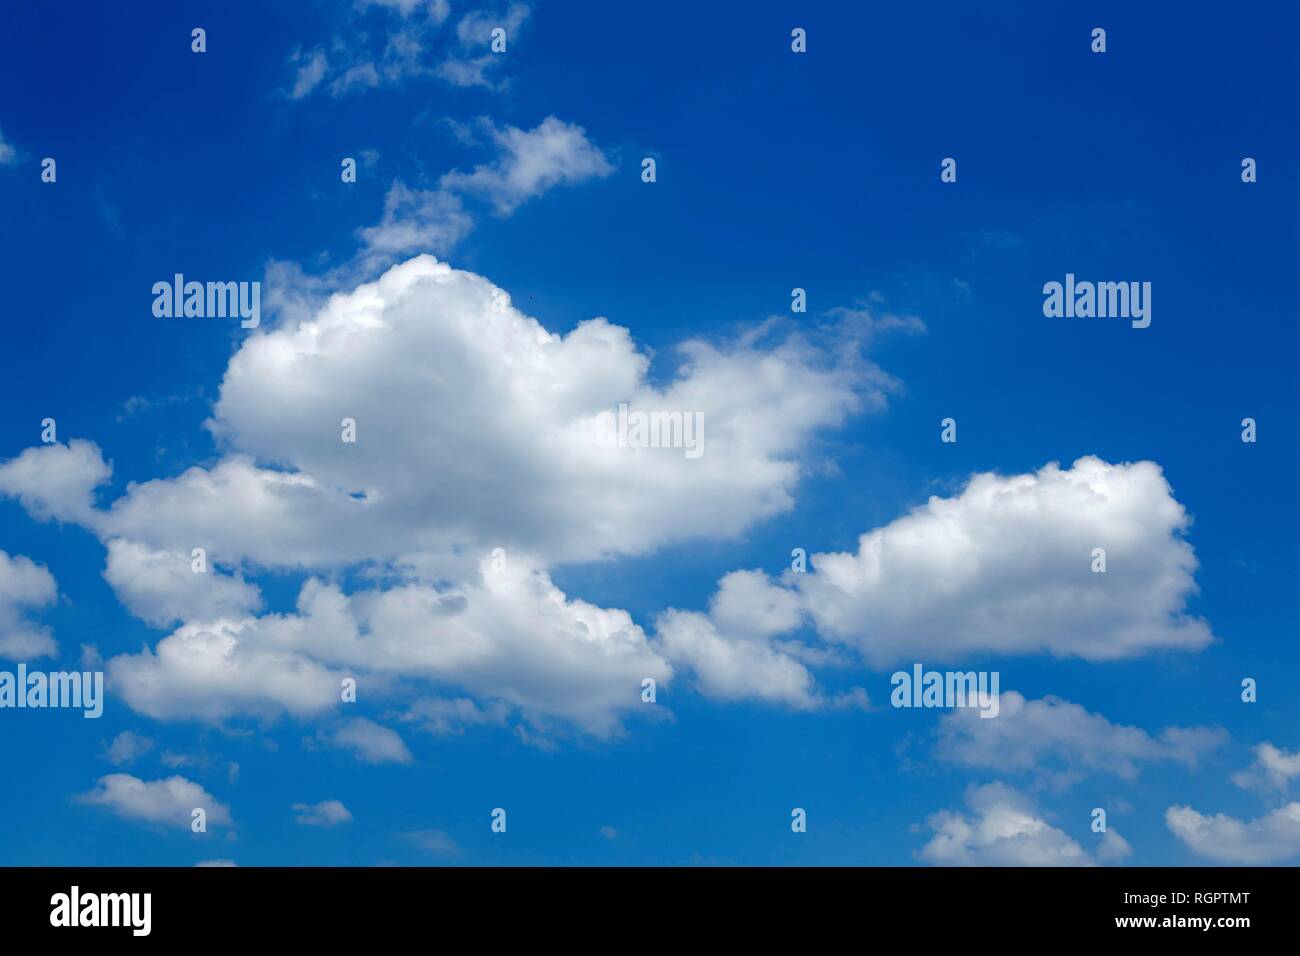 Clouds in the blue sky, Baden-Württemberg, Germany Stock Photo